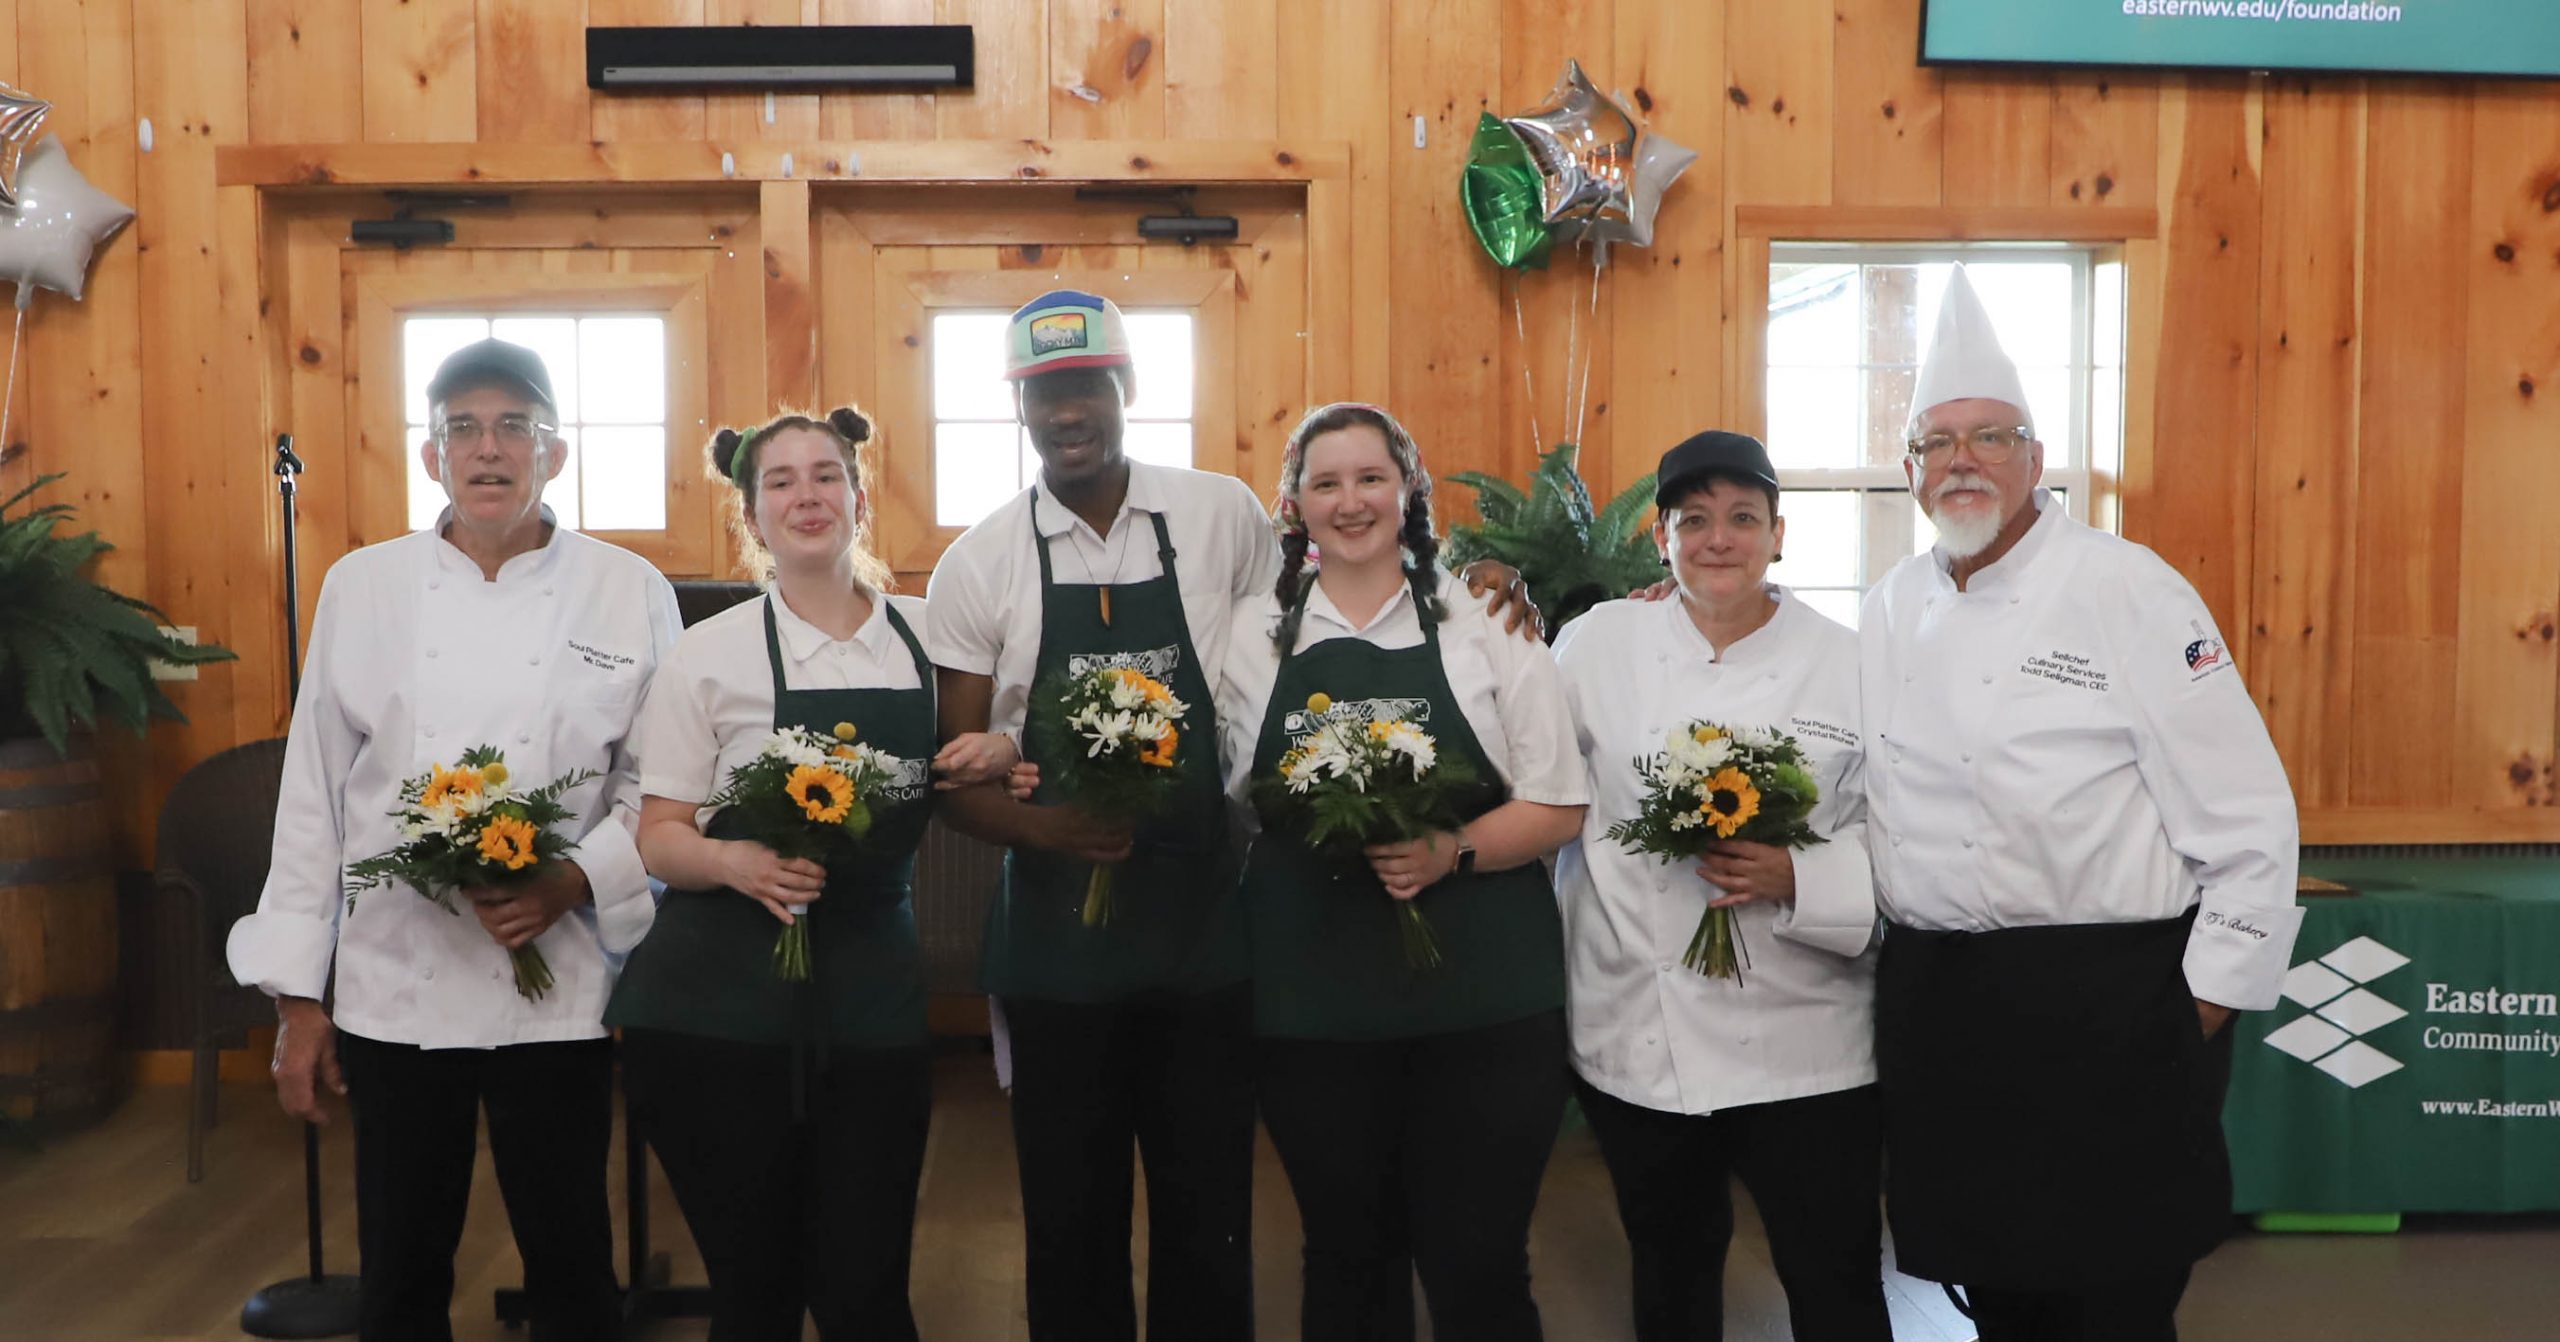 Chef Todd Seligman (far right) stands with his team at the close of the four-course meal. Seligman presented the group with bouquets to thank them for the many hours the team had devoted to the dinner.